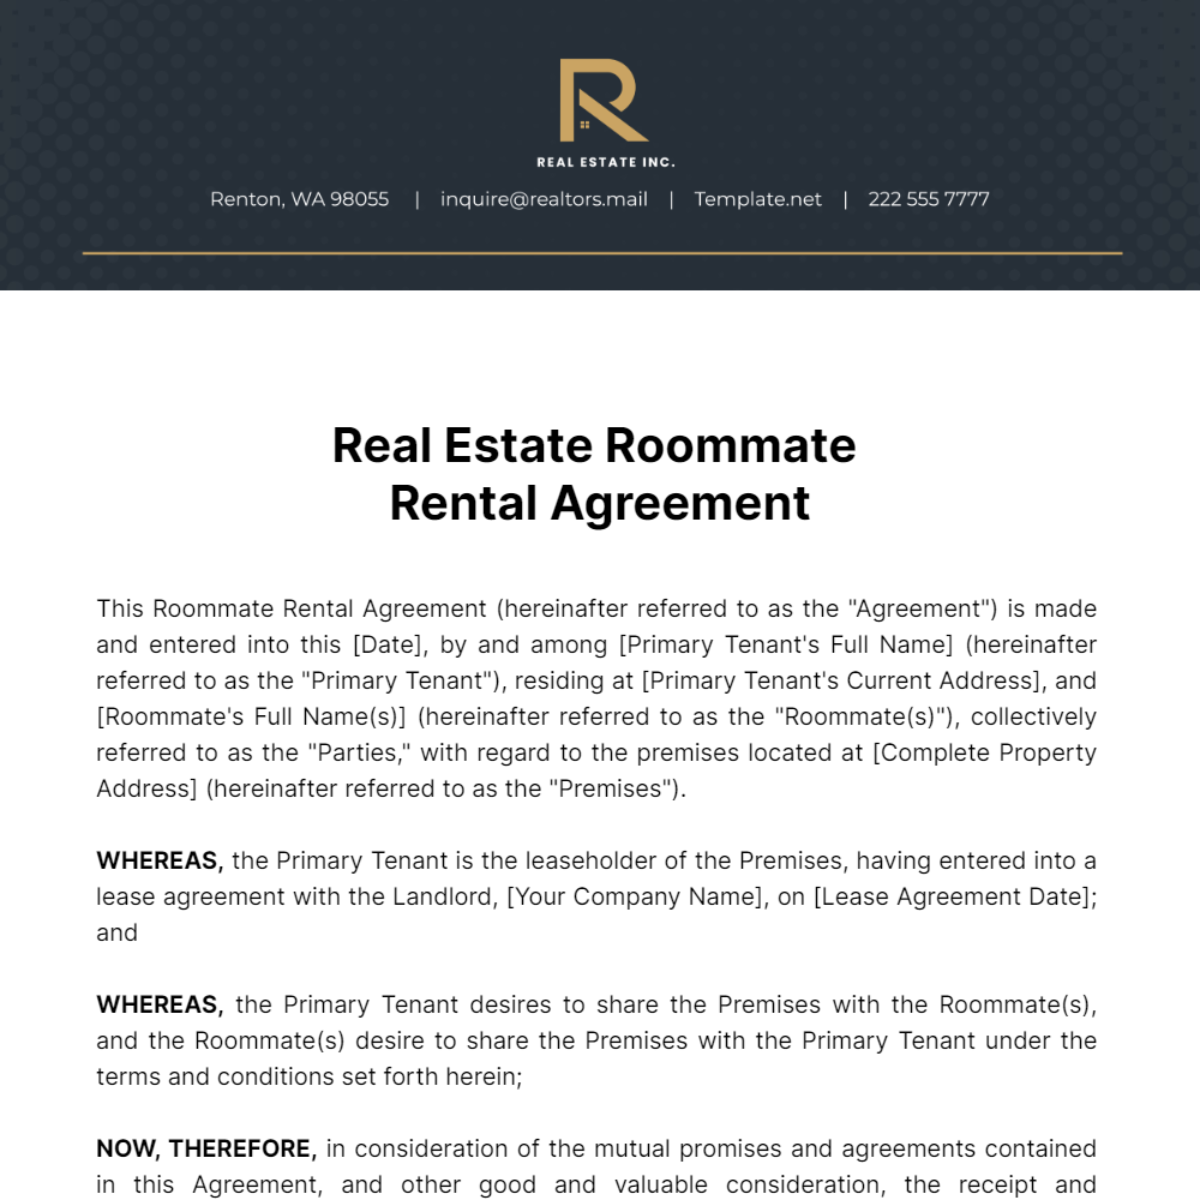 Real Estate Roommate Rental Agreement Template